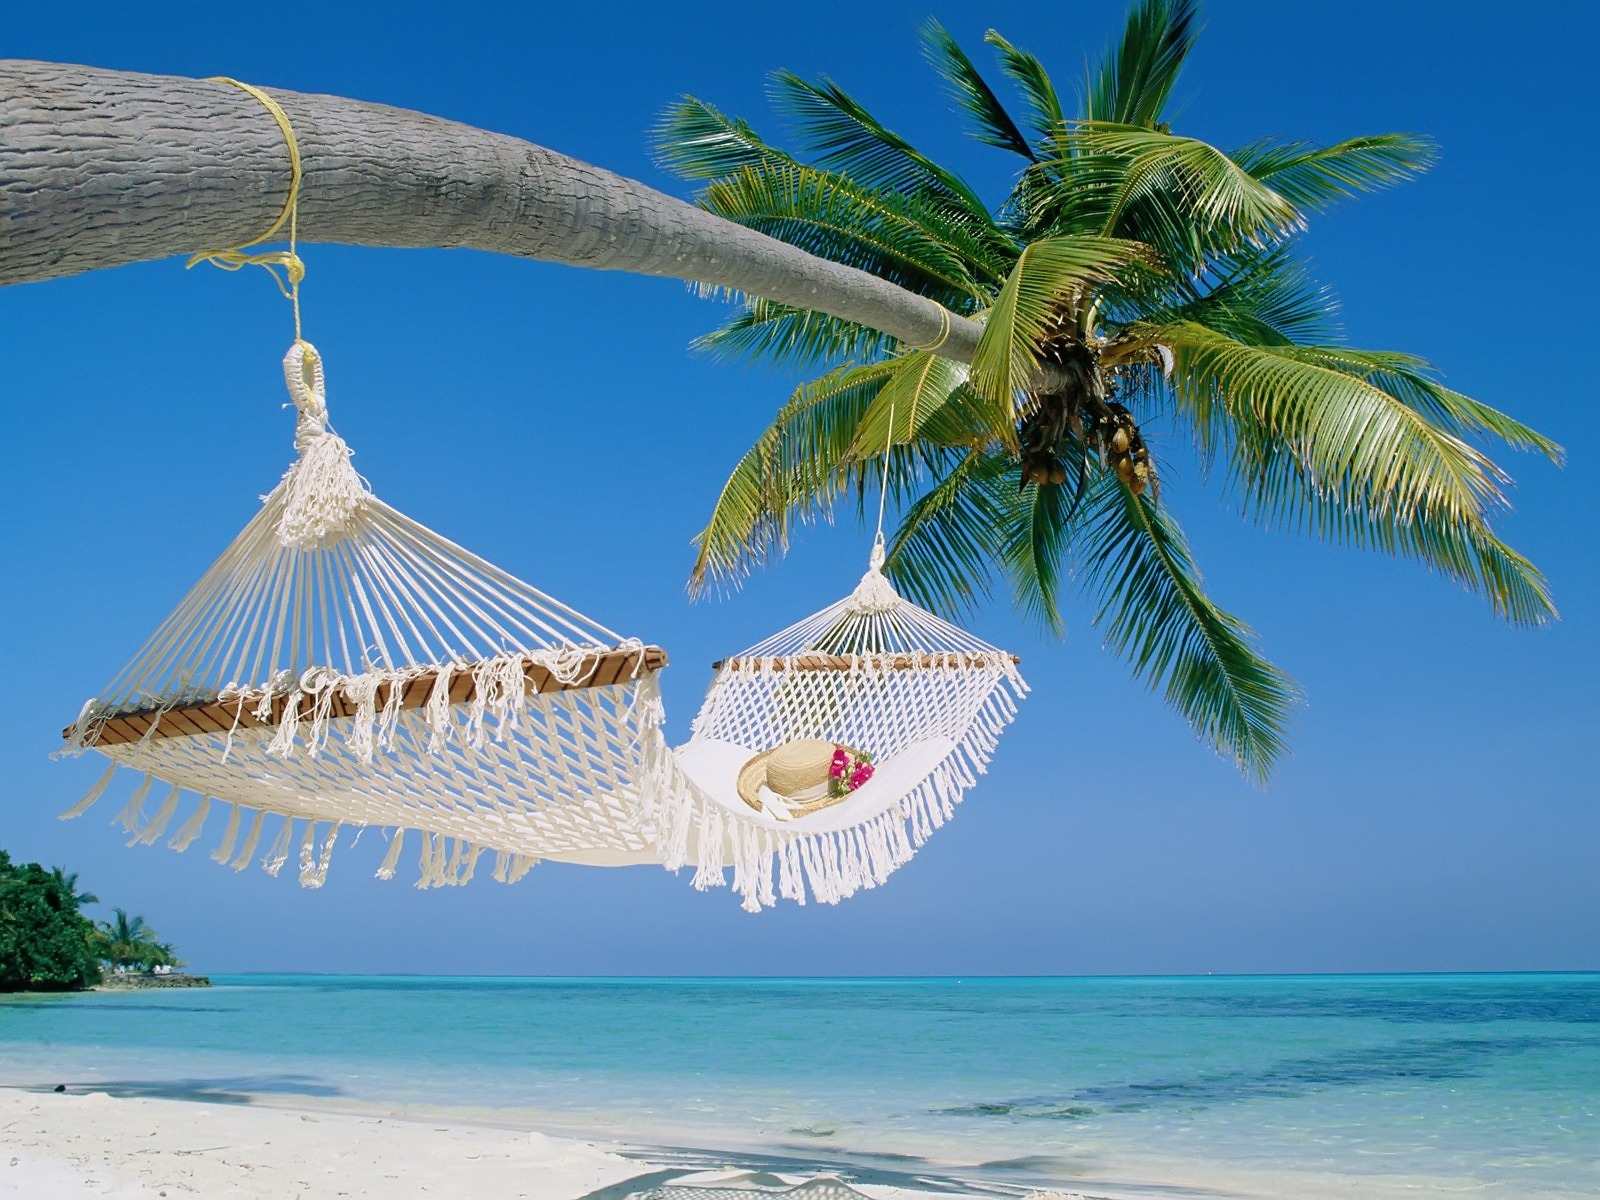 Hammock Wallpaper Beaches Nature Wallpapers in jpg format for free download